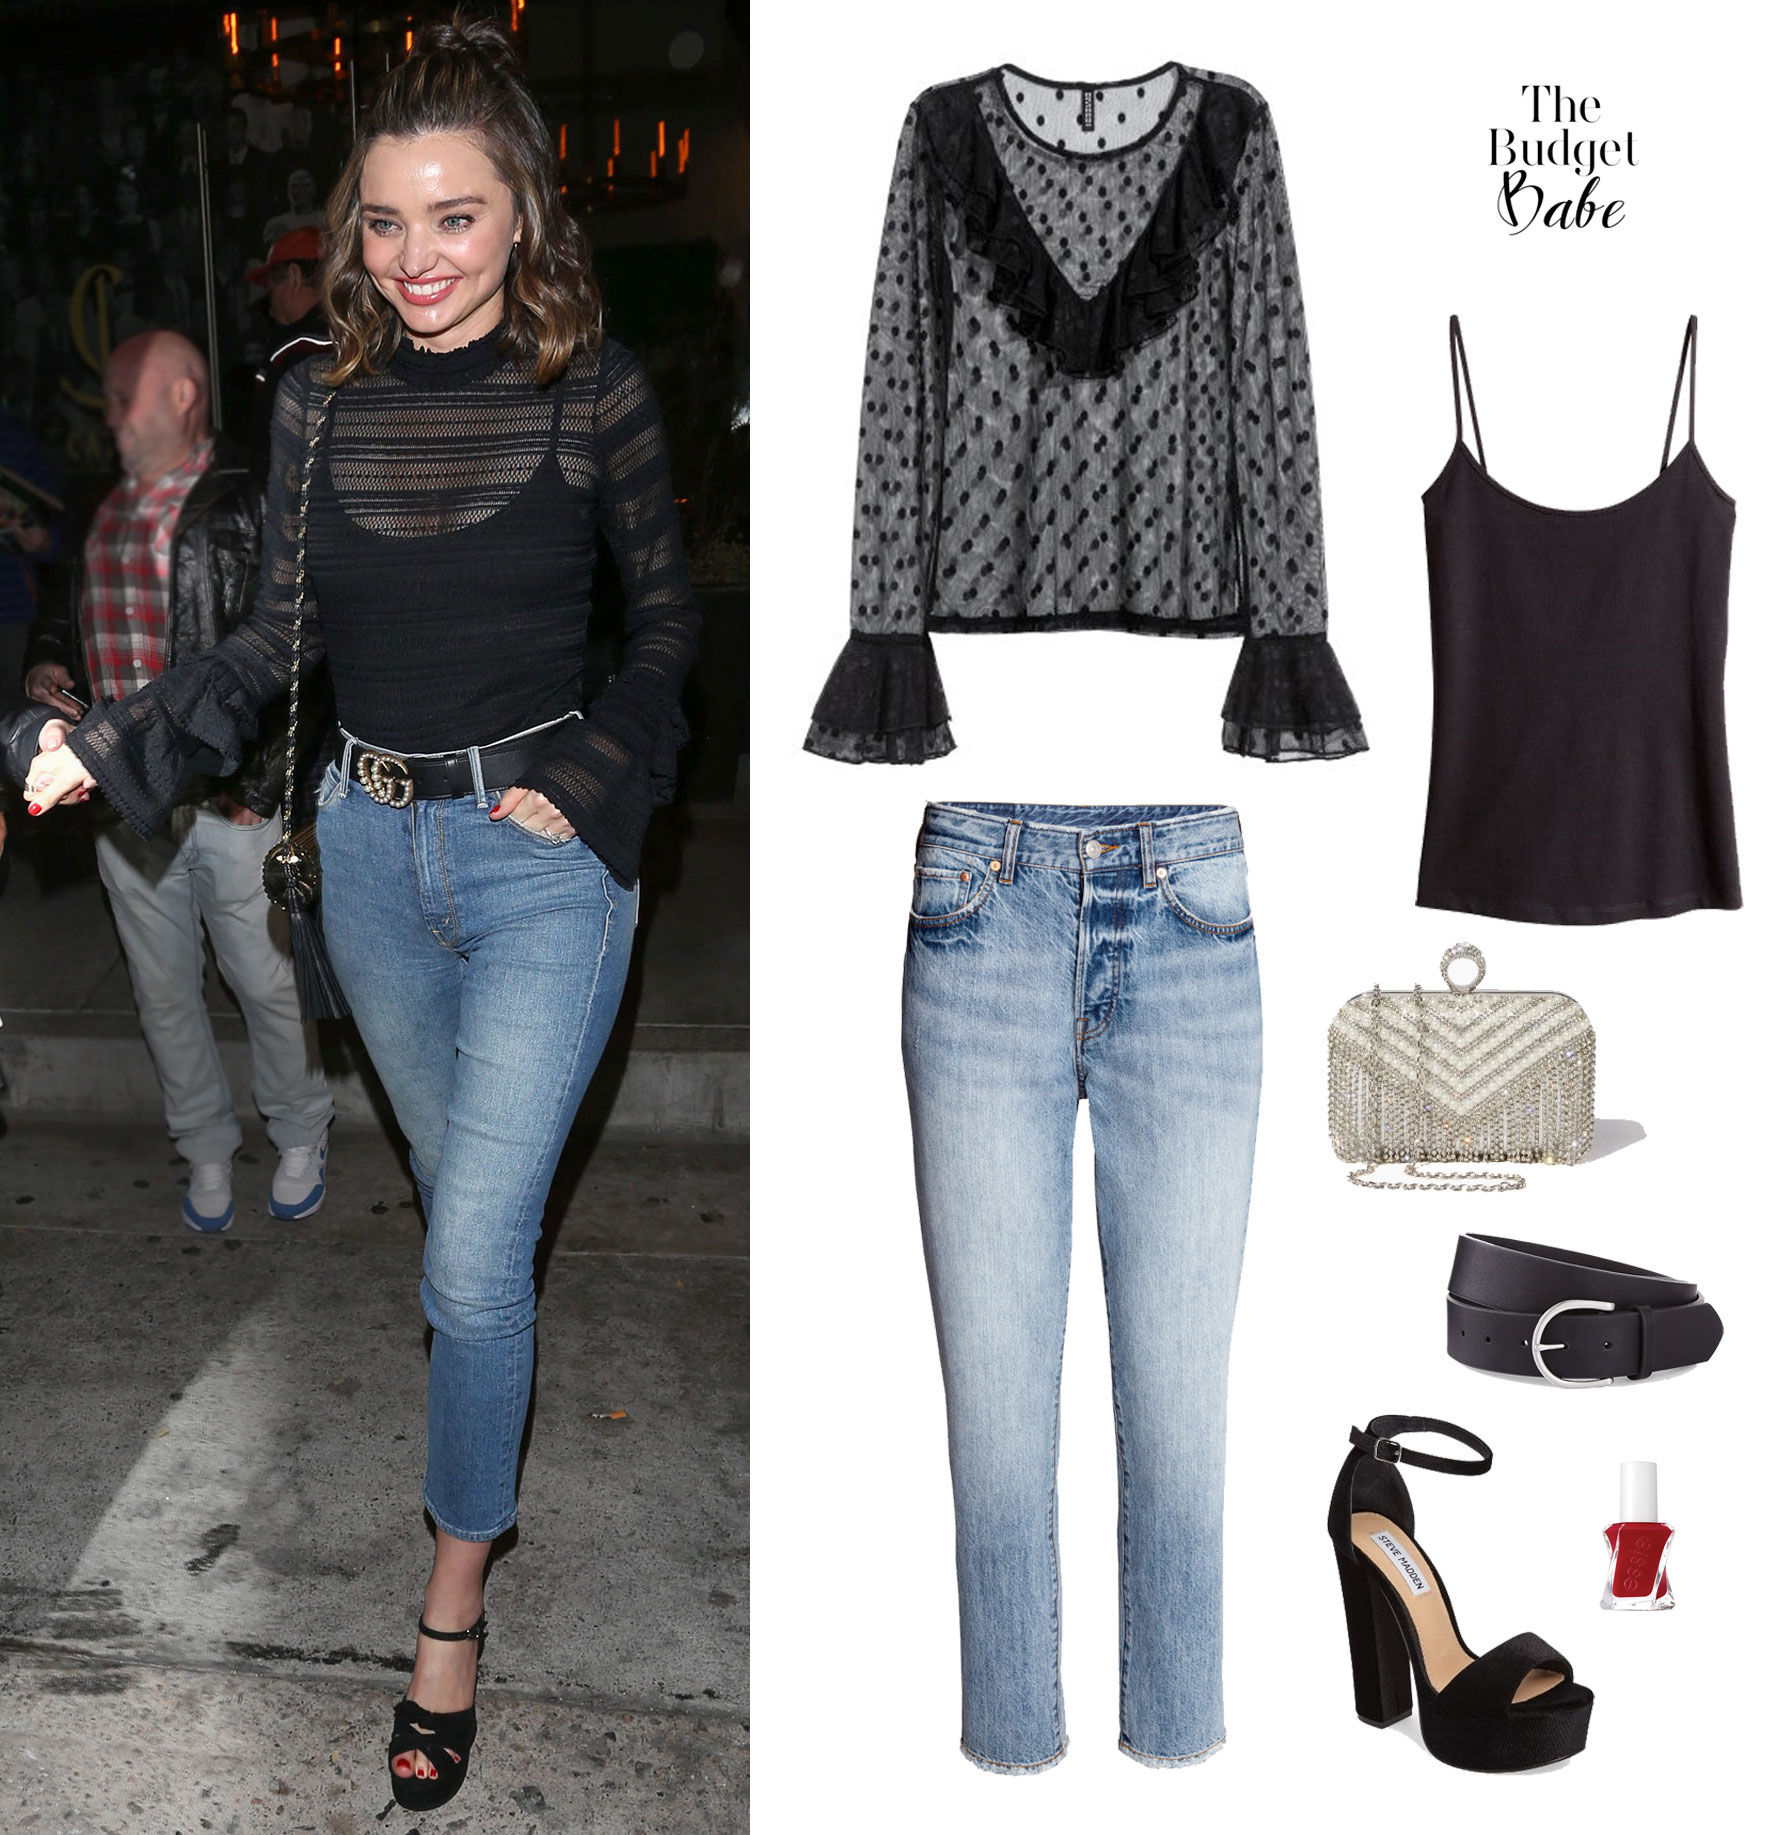 Miranda Kerr shows off a sexy going out look, and we've got the pieces you need to get it for less.